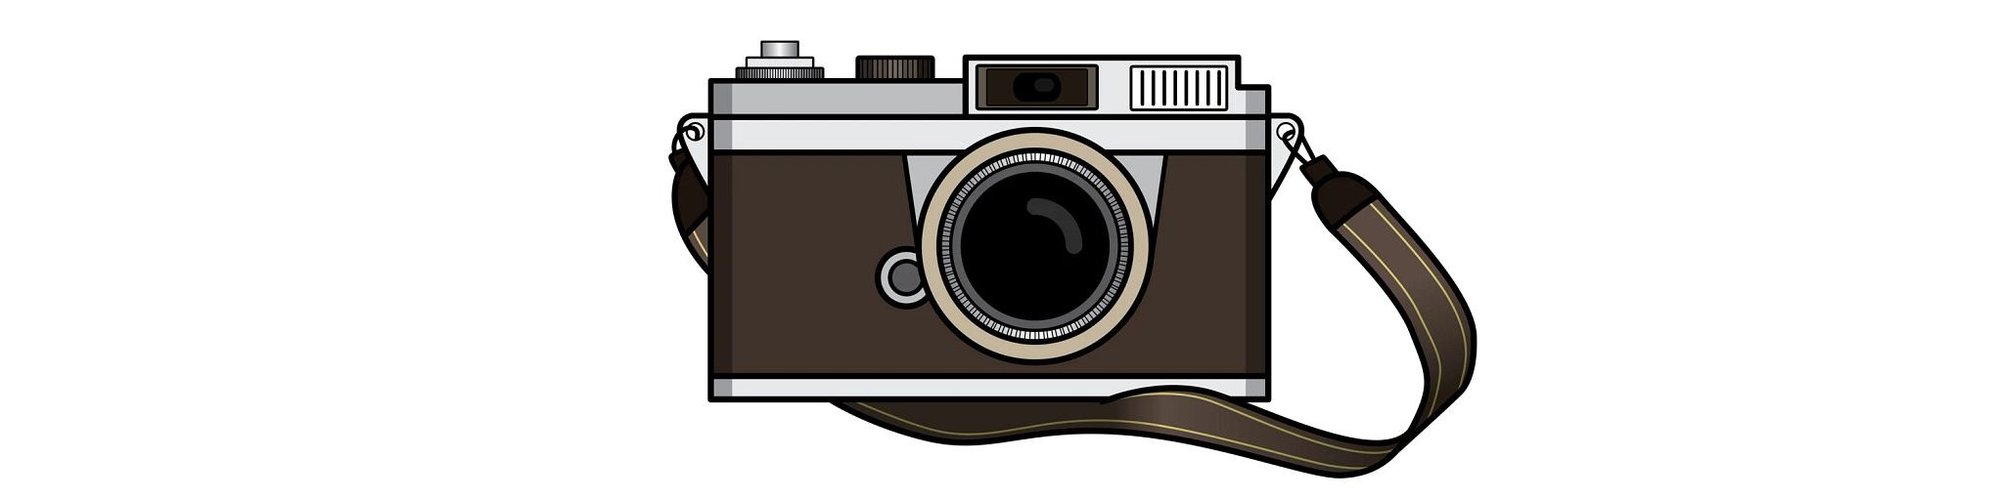 Graphic of a camera - Carpet Plus in the Worthington, MN area